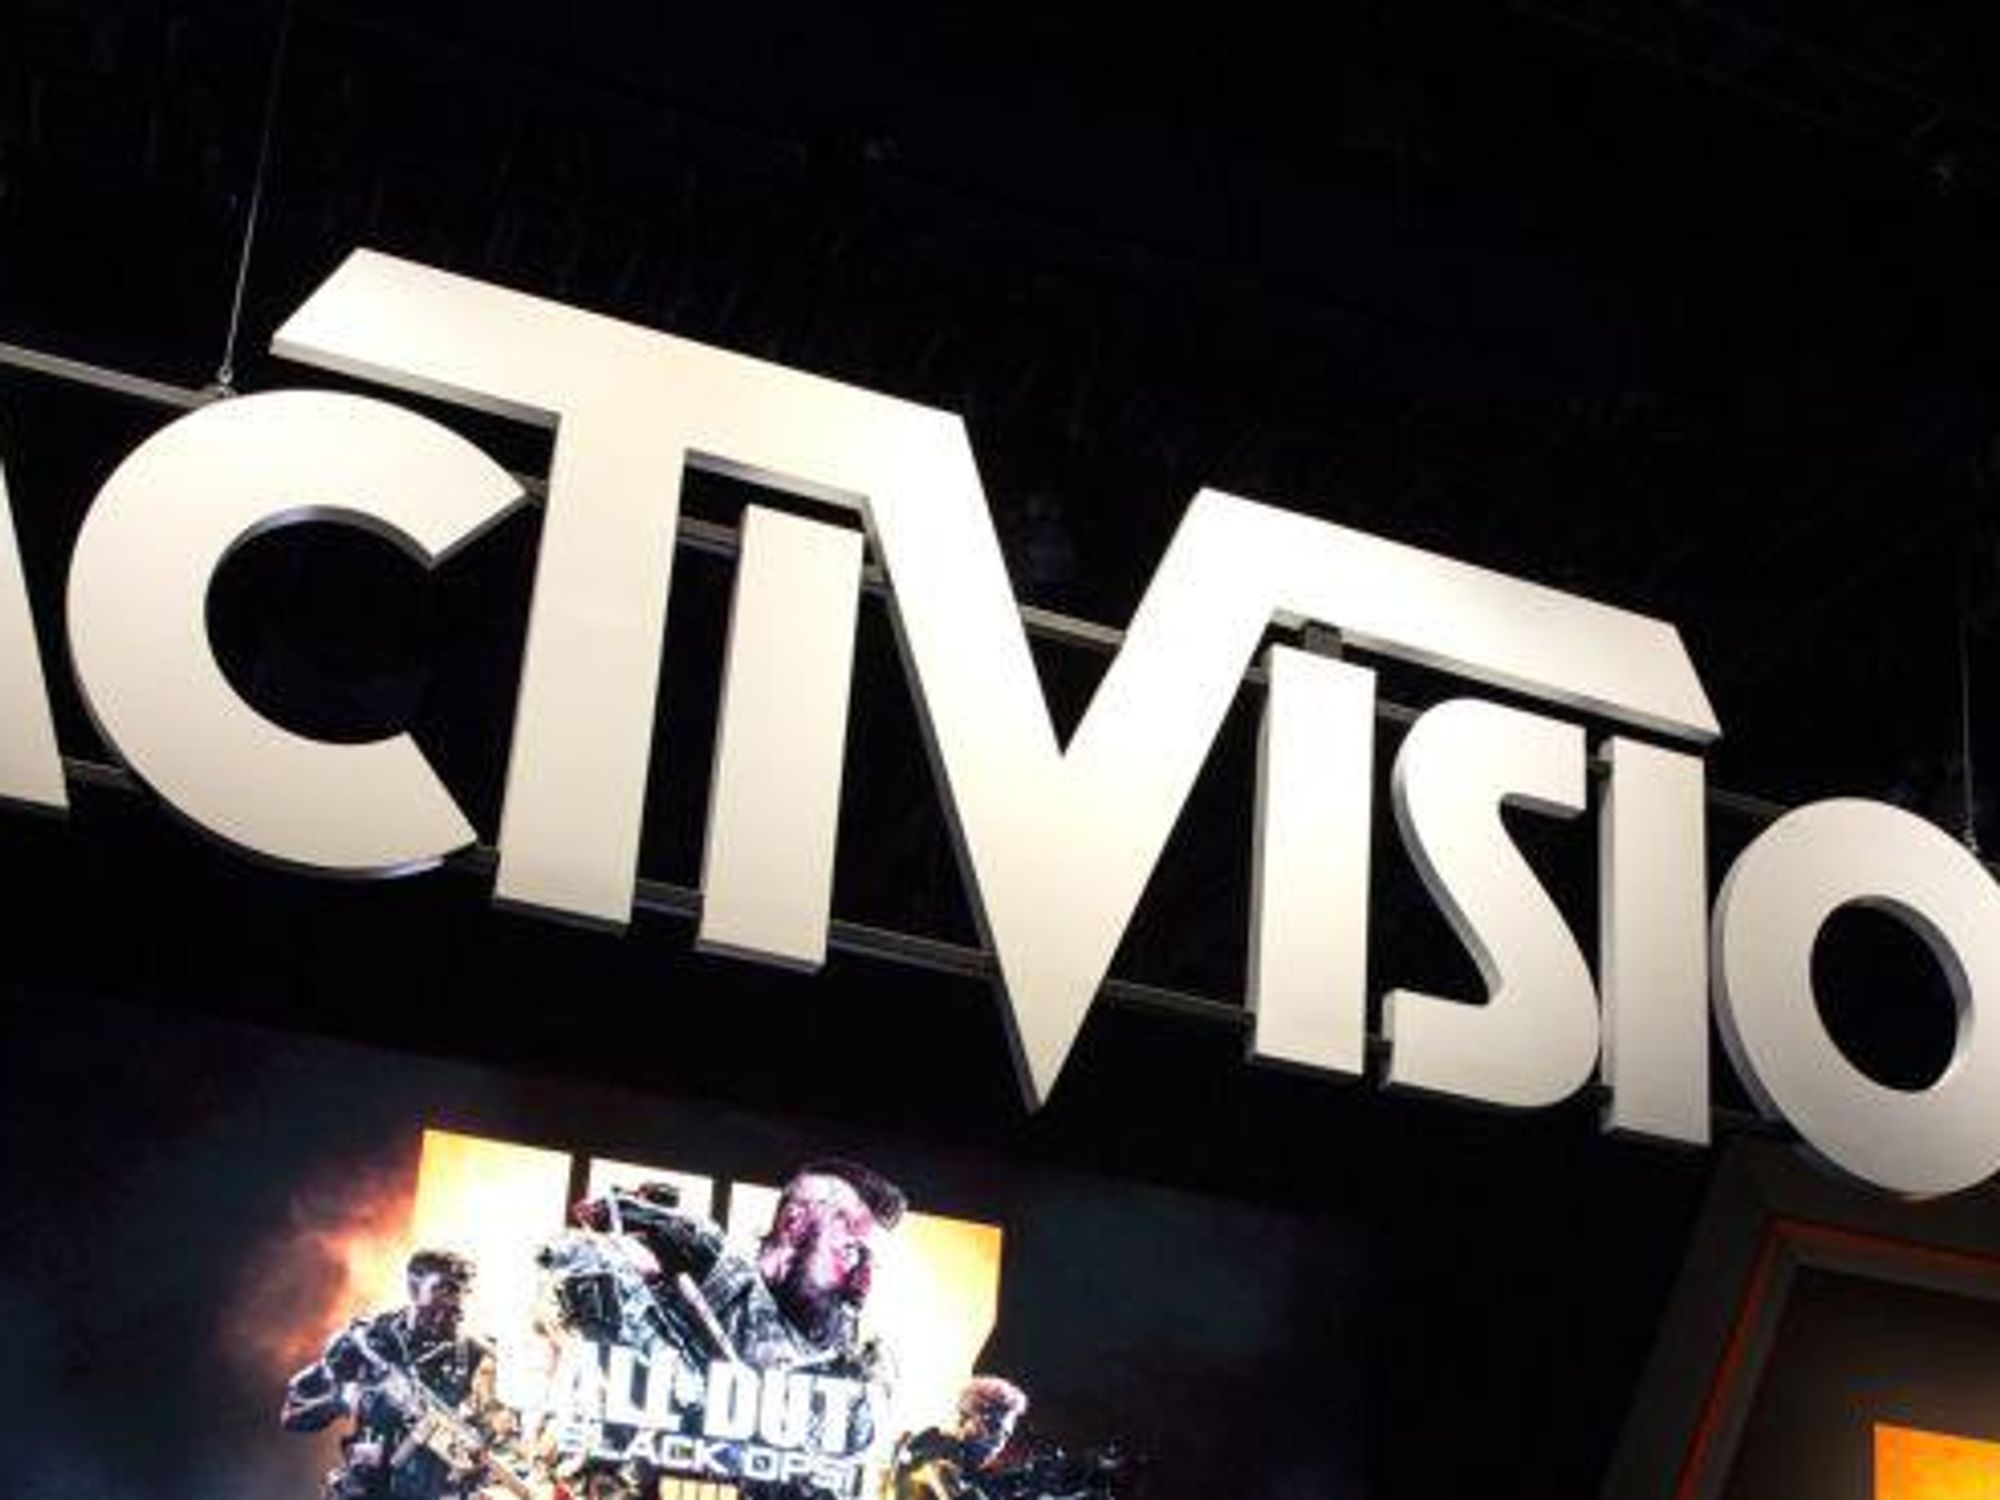 With Microsoft Deal, Activision CEO Bobby Kotick’s Tumultuous Reign Nears a Lucrative End